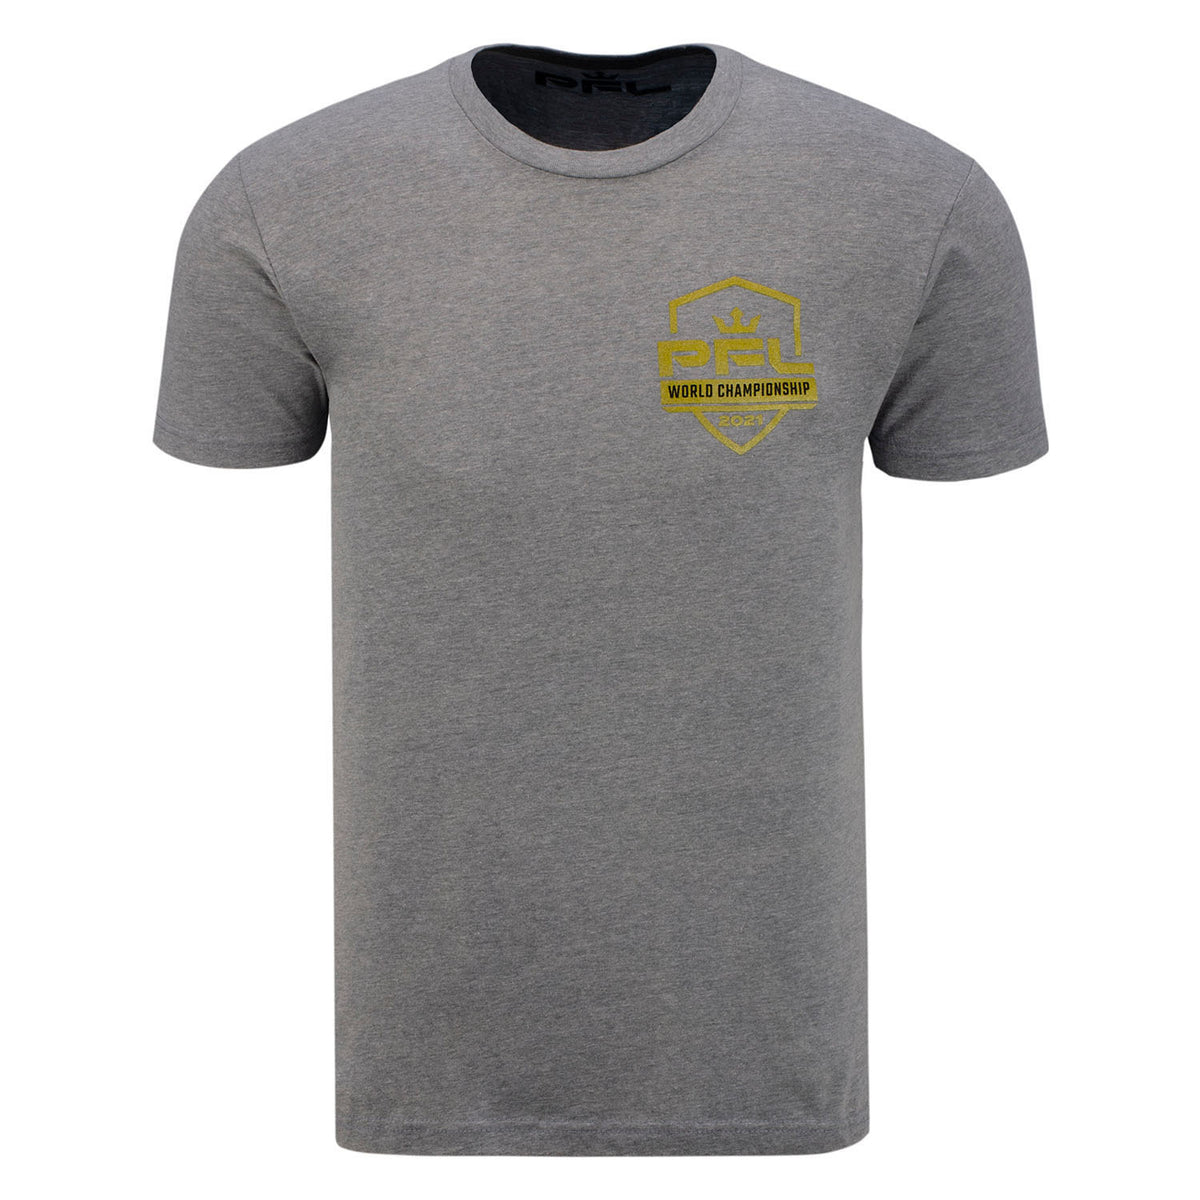 2021 Championship Blue Corner Shirt in Grey - Front View